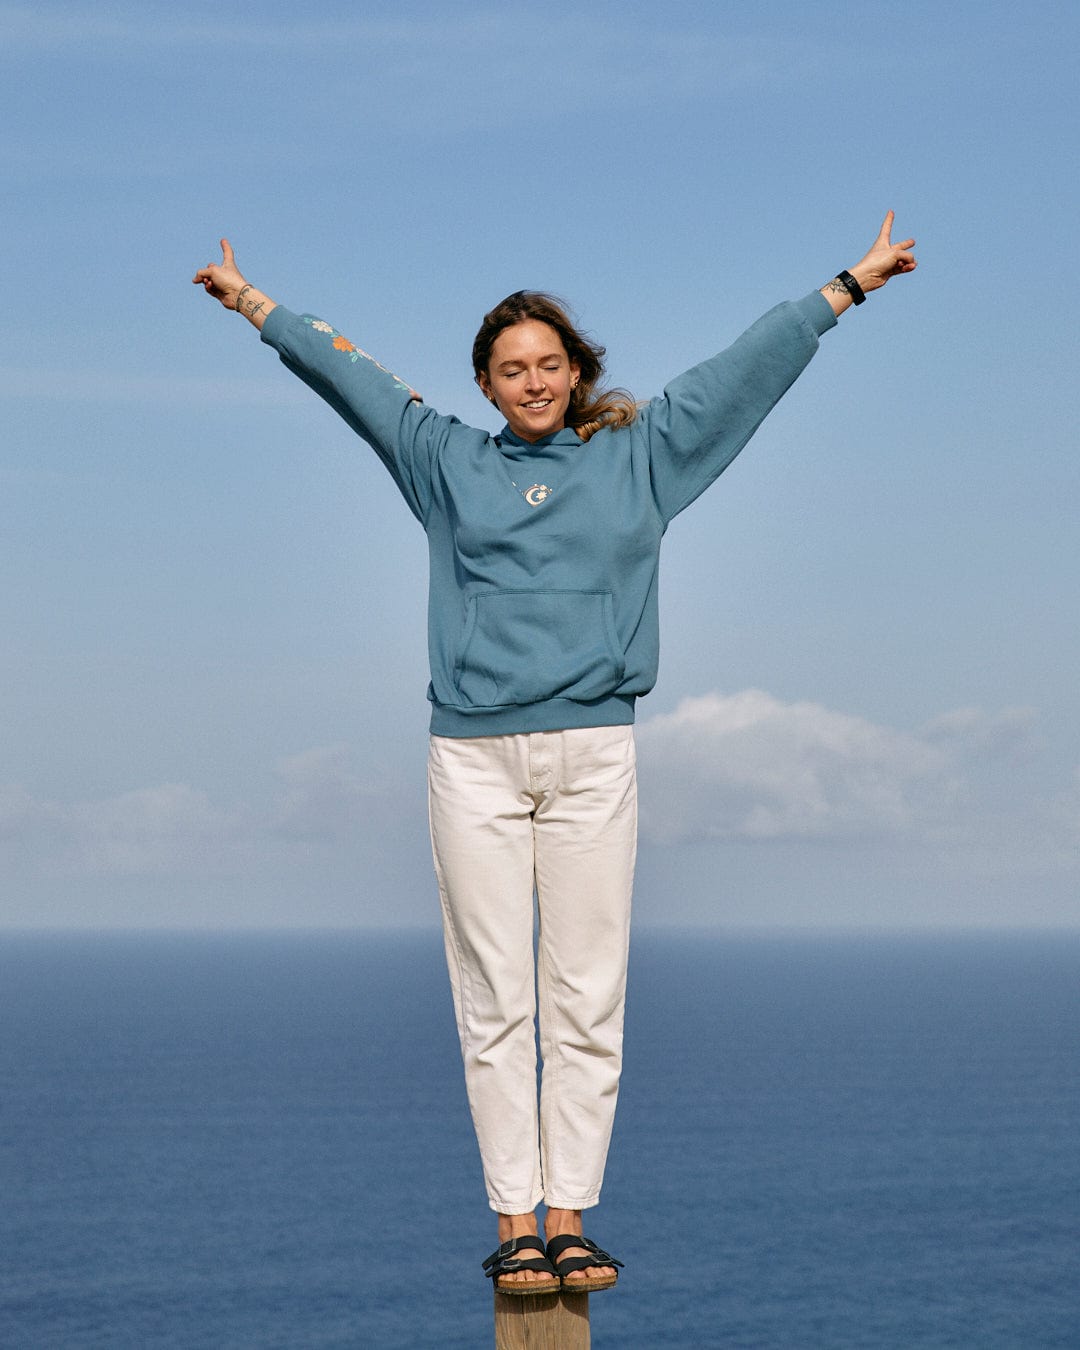 A person in a Better Days - Womens Pop Hoodie in blue and white pants stands on a ledge with their back to the sea, arms raised and making a victory sign with both hands, embodying the spirit of "Brighter Days" by Saltrock.